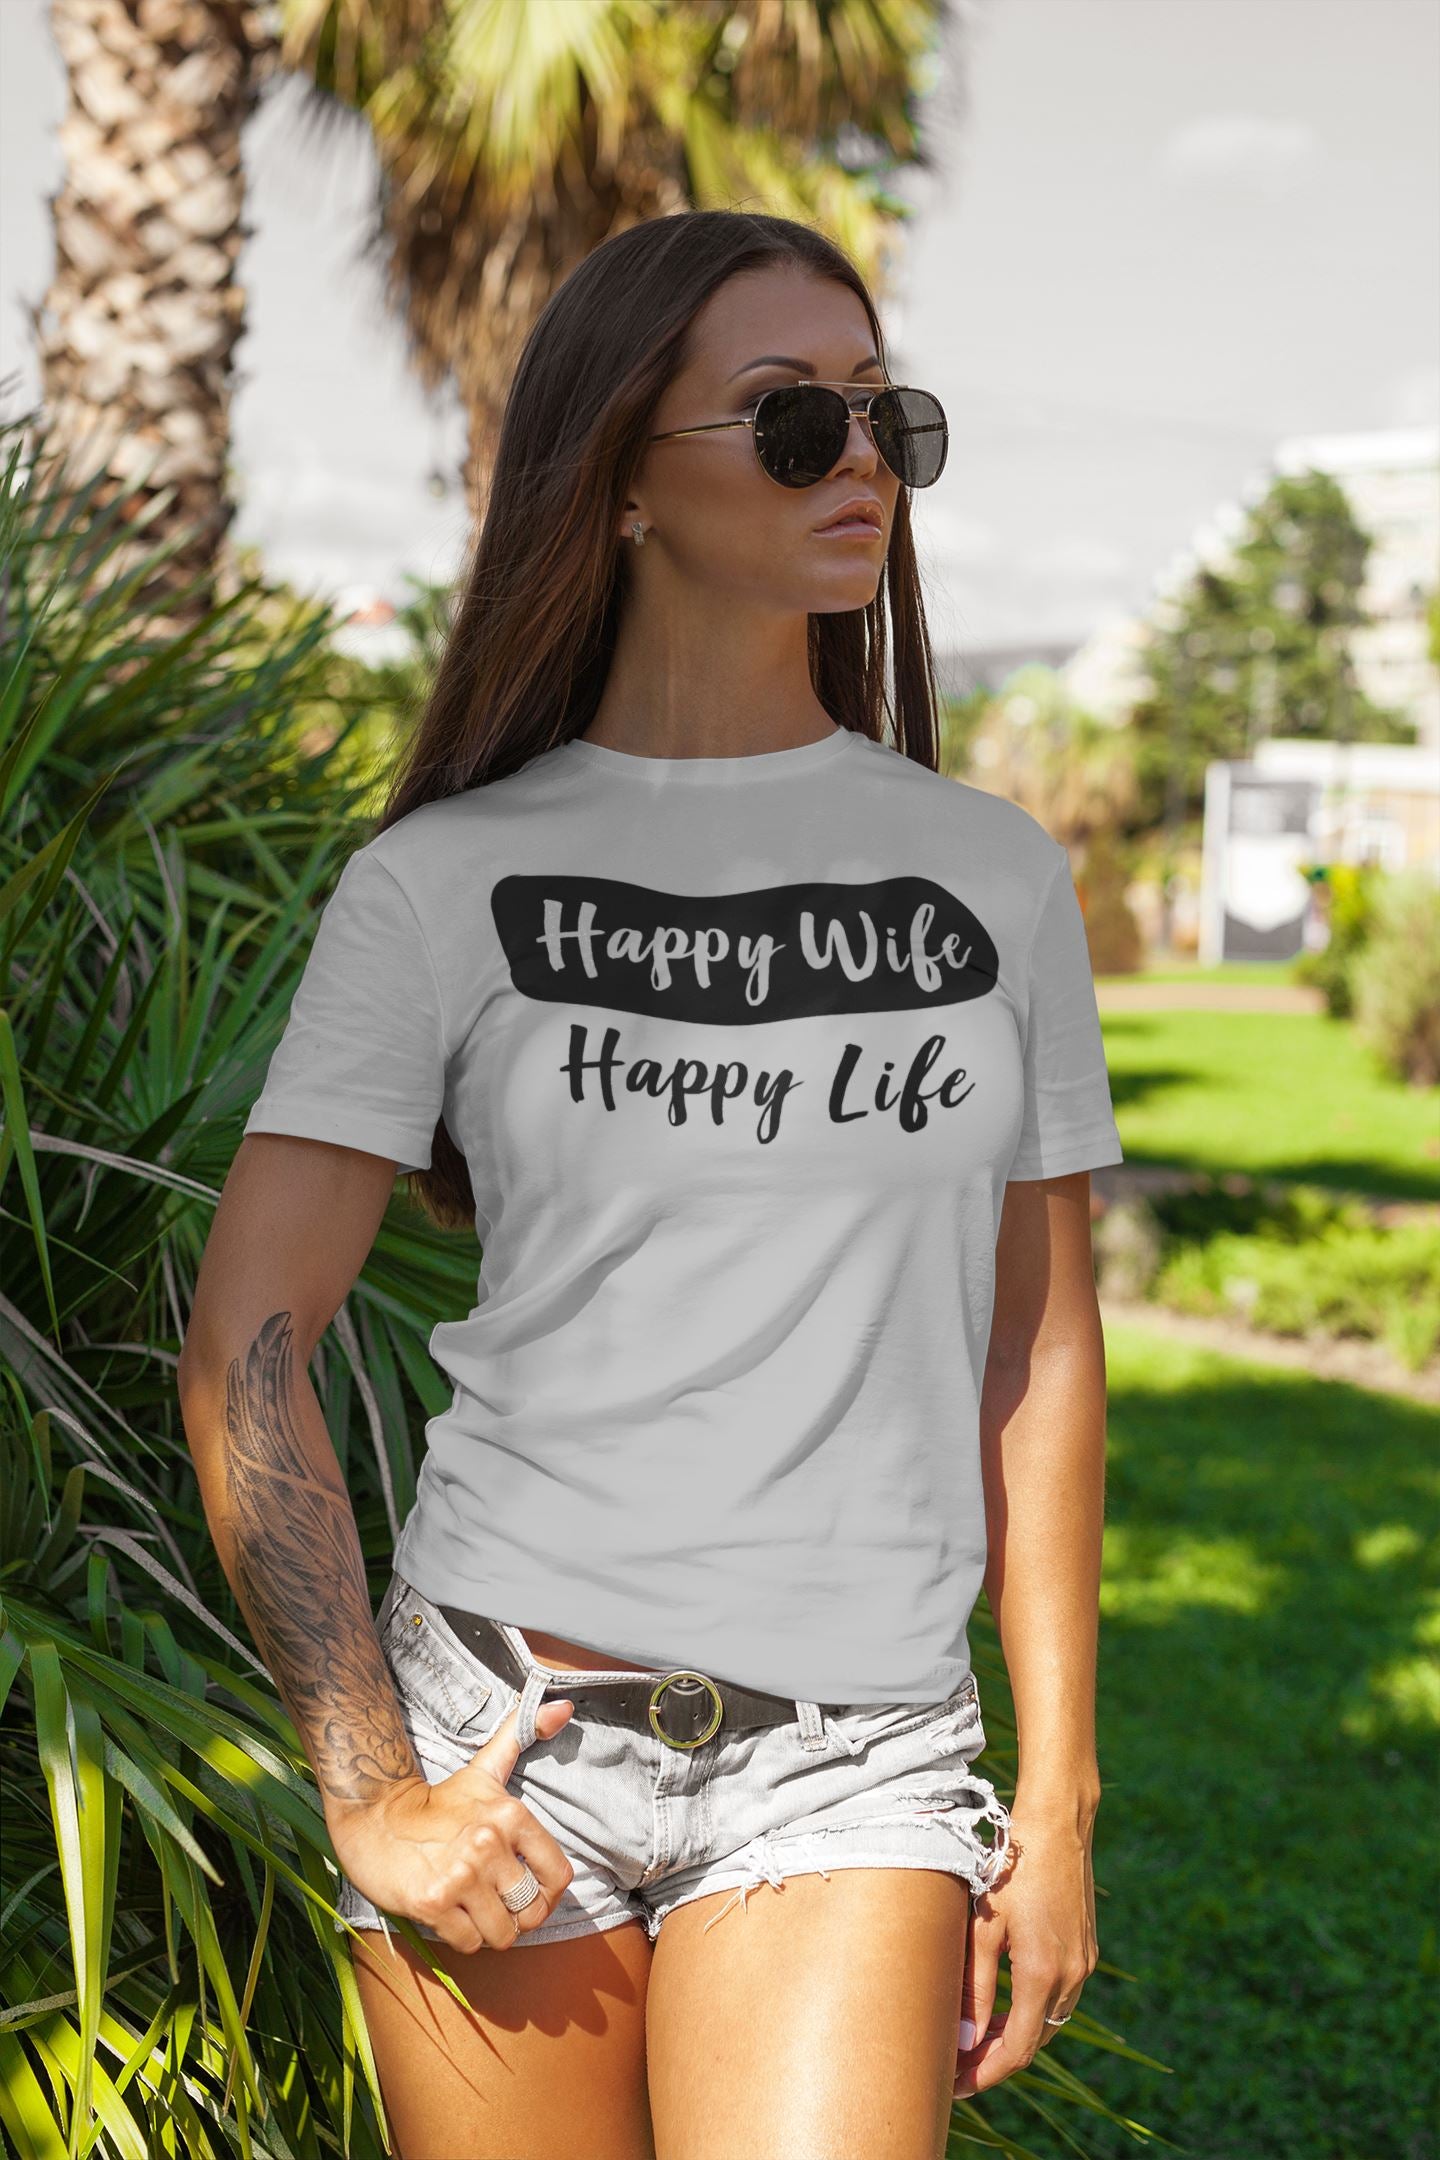 Happy Wife Happy Life Exclusive Light Grey T Shirt for Men and Women freeshipping - Catch My Drift India